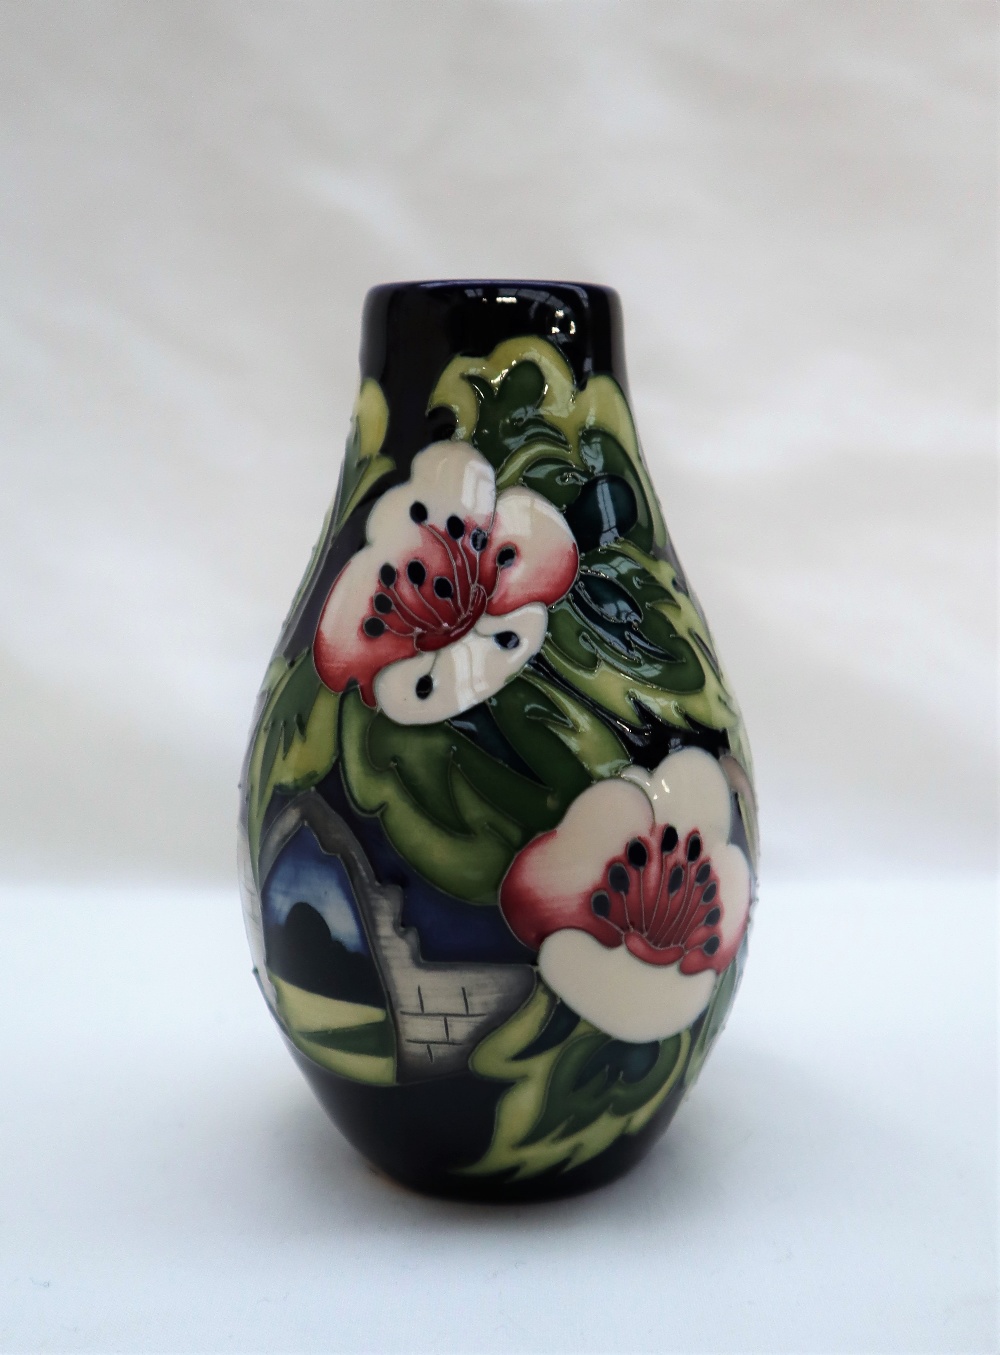 A limited edition Moorcroft pottery vase decorated with pears and flowers, dated 2010,